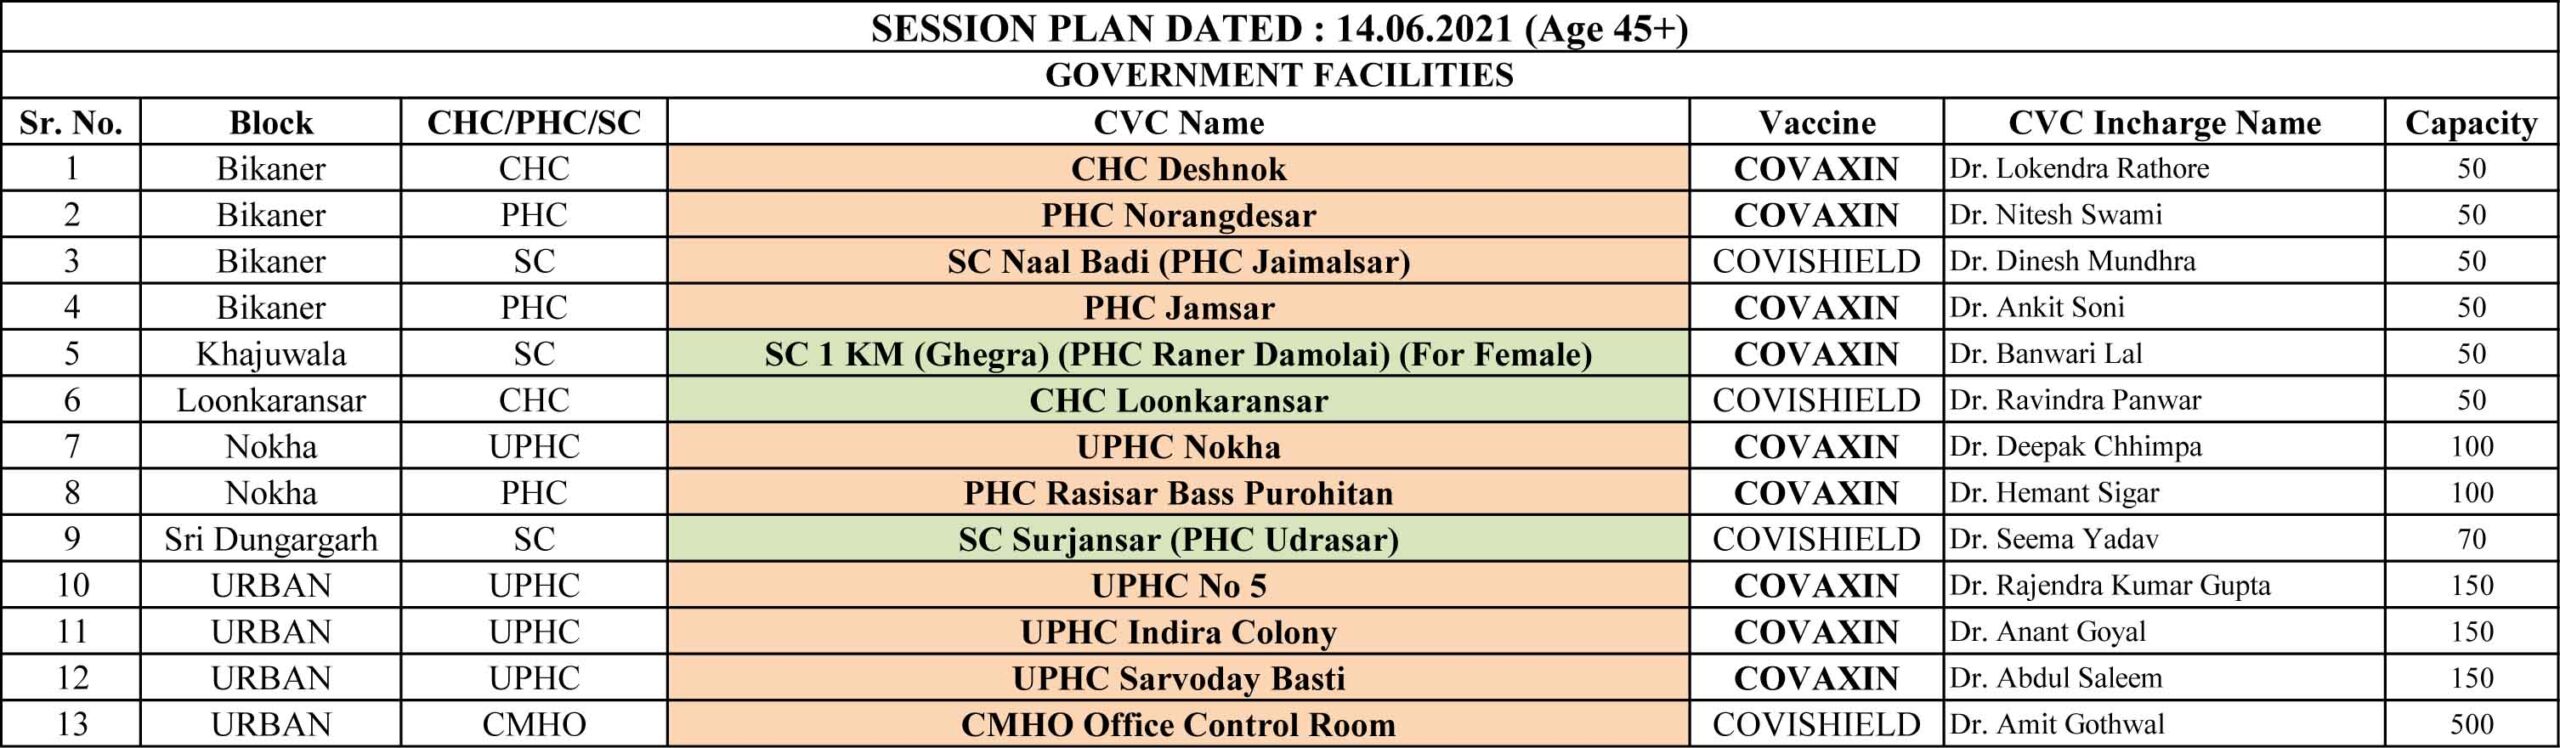 45 Session Plan Dated 14 scaled